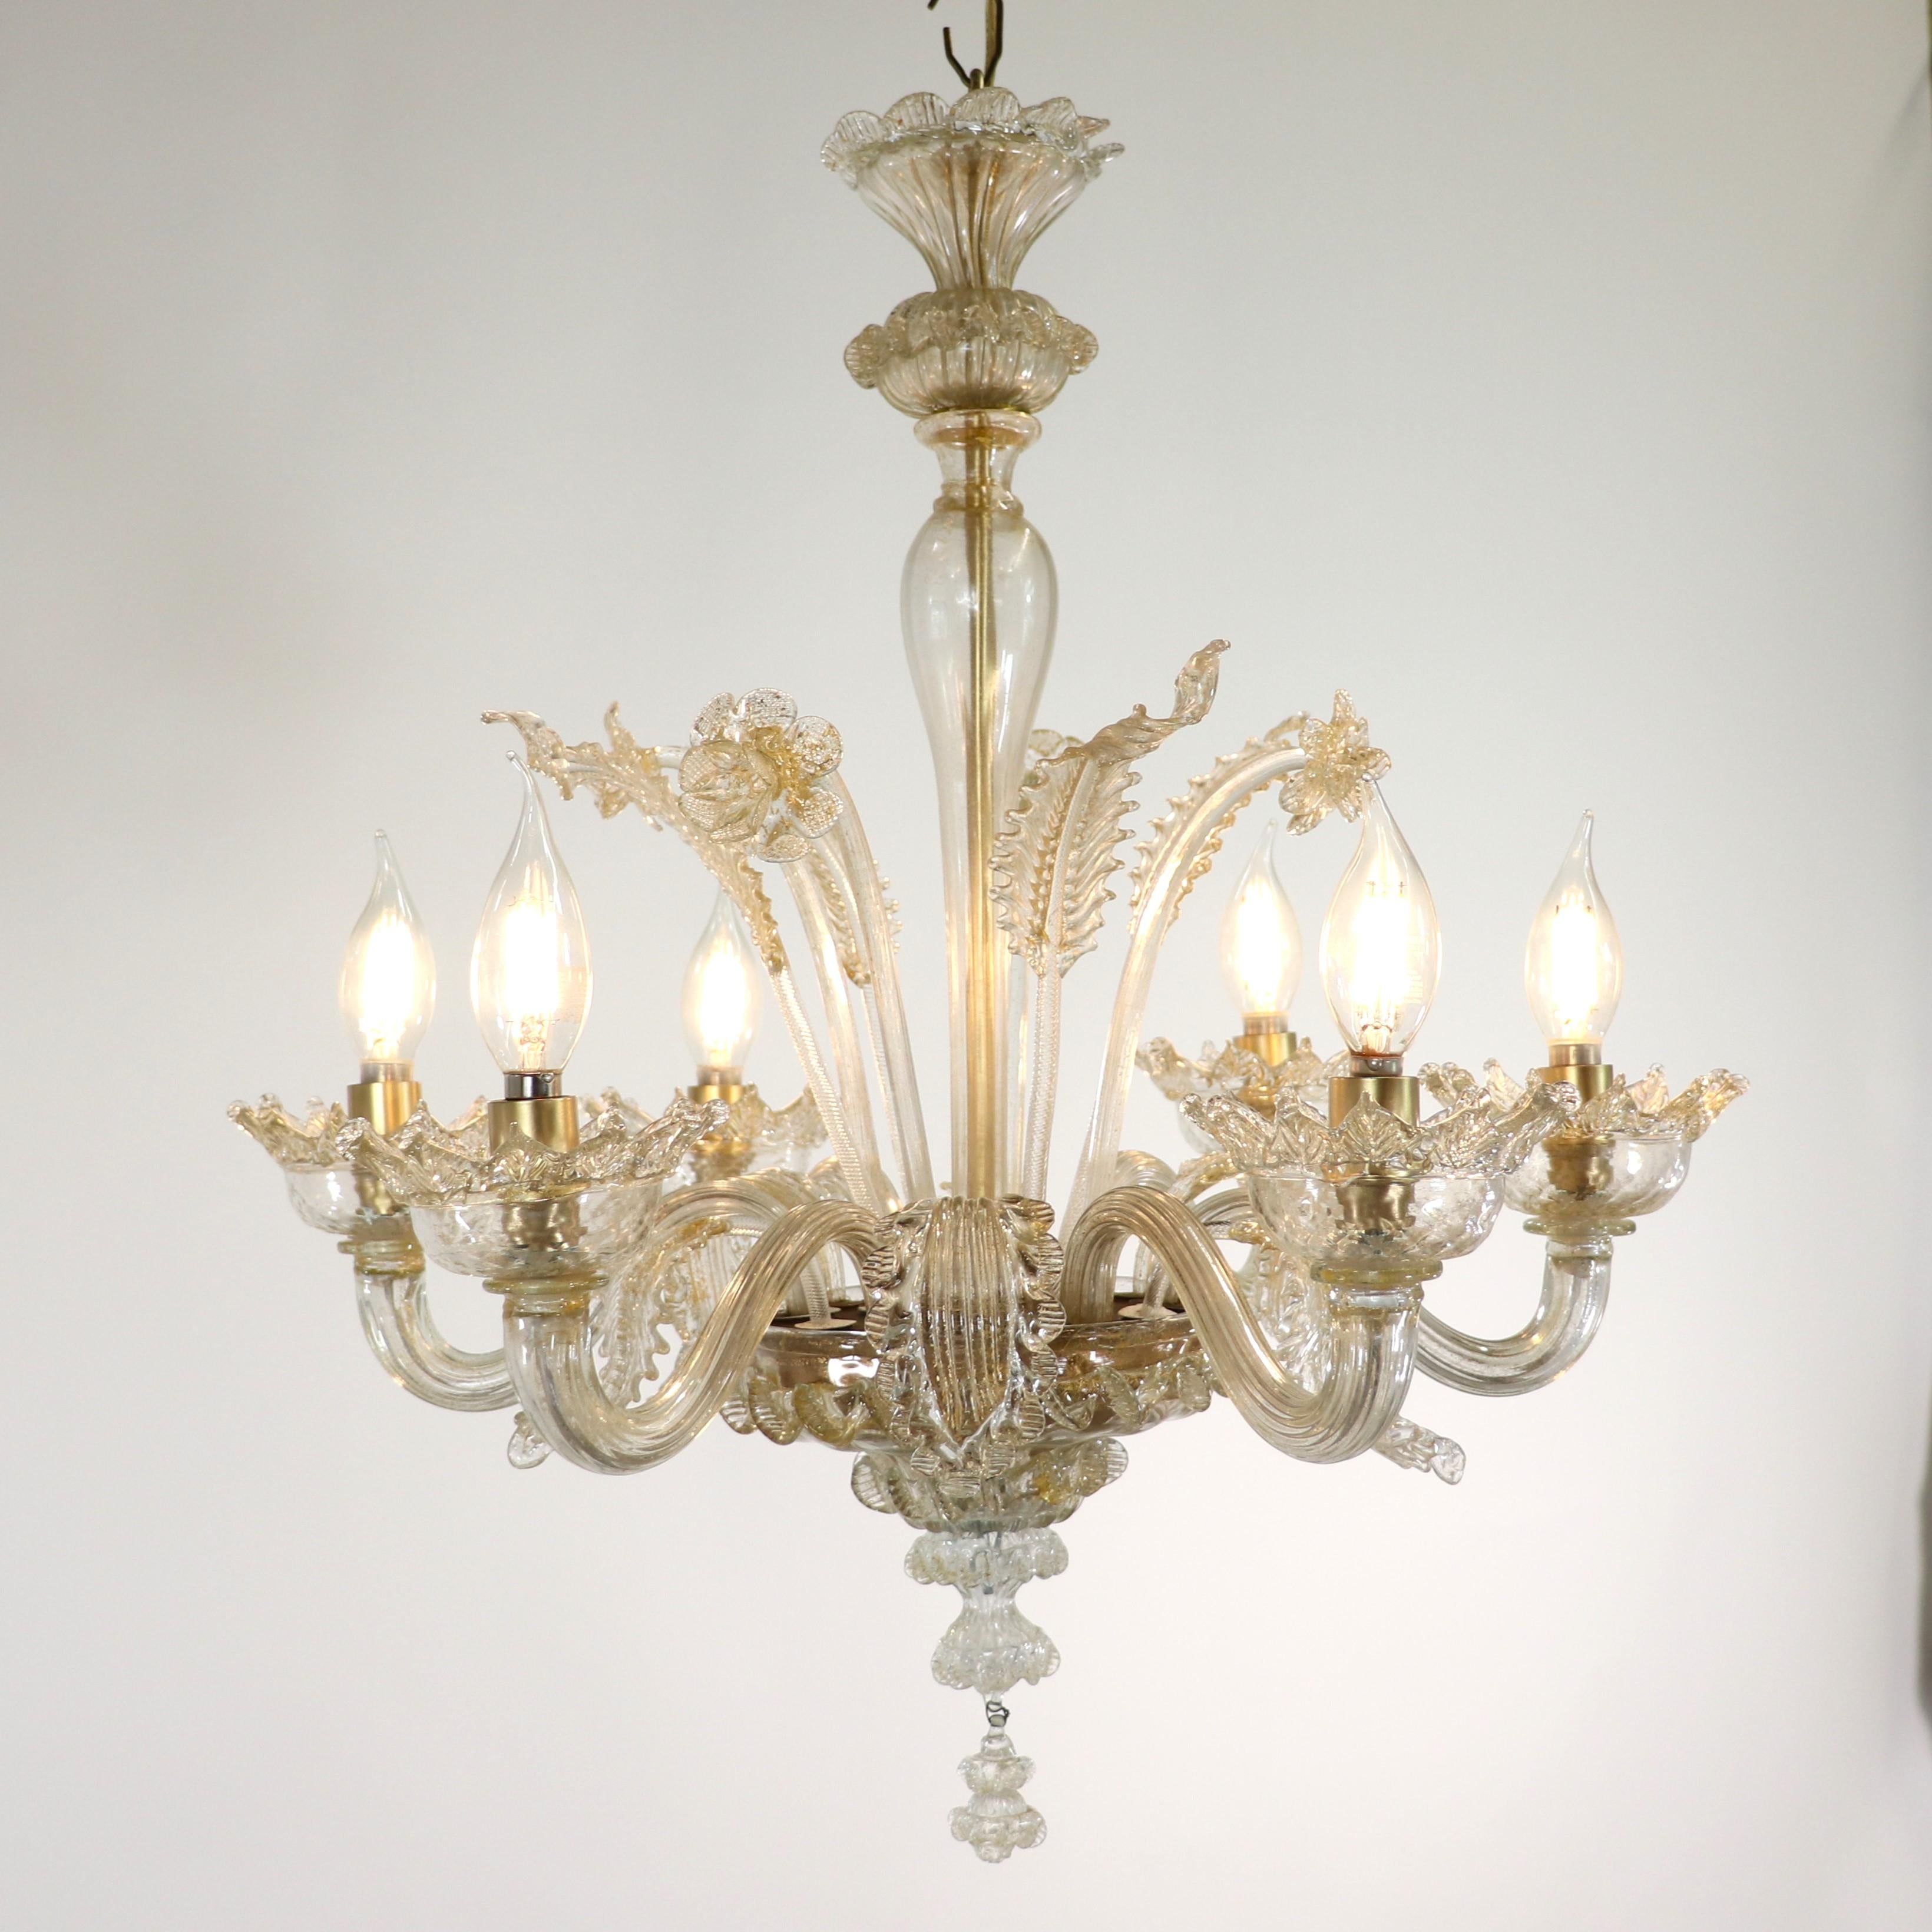 This handcrafted gold-infused cristallo Murano chandelier has six scroll arms holding bobeches with petal-shaped trim. Featuring a bulbous center column stylized here with daffodils and leaves. The glass houses on the island of Murano are famous for